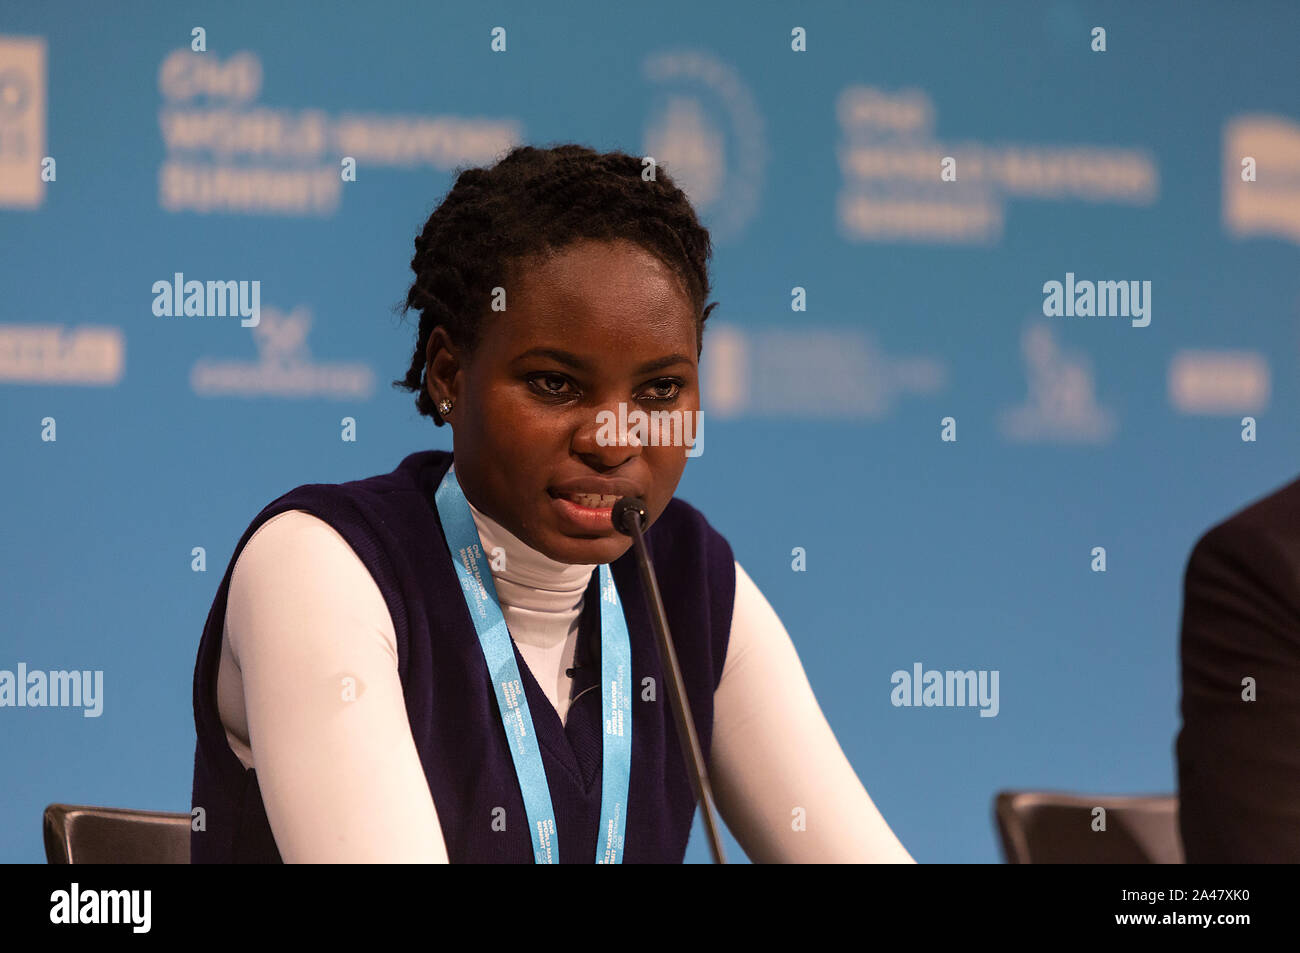 COPENHAGEN, DENMARK – OCTOBER 11, 2019: Hilda Flavia Nakabuye, climate activists within the ‘Fridays for Future’ movement, Uganda, during the ‘Mayors and Youth Activist’ press conference at the C40 World Mayors Summit  The young activist from Uganda gave a powerful and emotional speech and broke into tears. Her speech caused great appluas from the tightly packed press room. During the press conference young activist explained what they expect of the grown-up politicians. More than 90 mayors of some of the world’s largest and most influential cities representing some 700 million people meet in Stock Photo